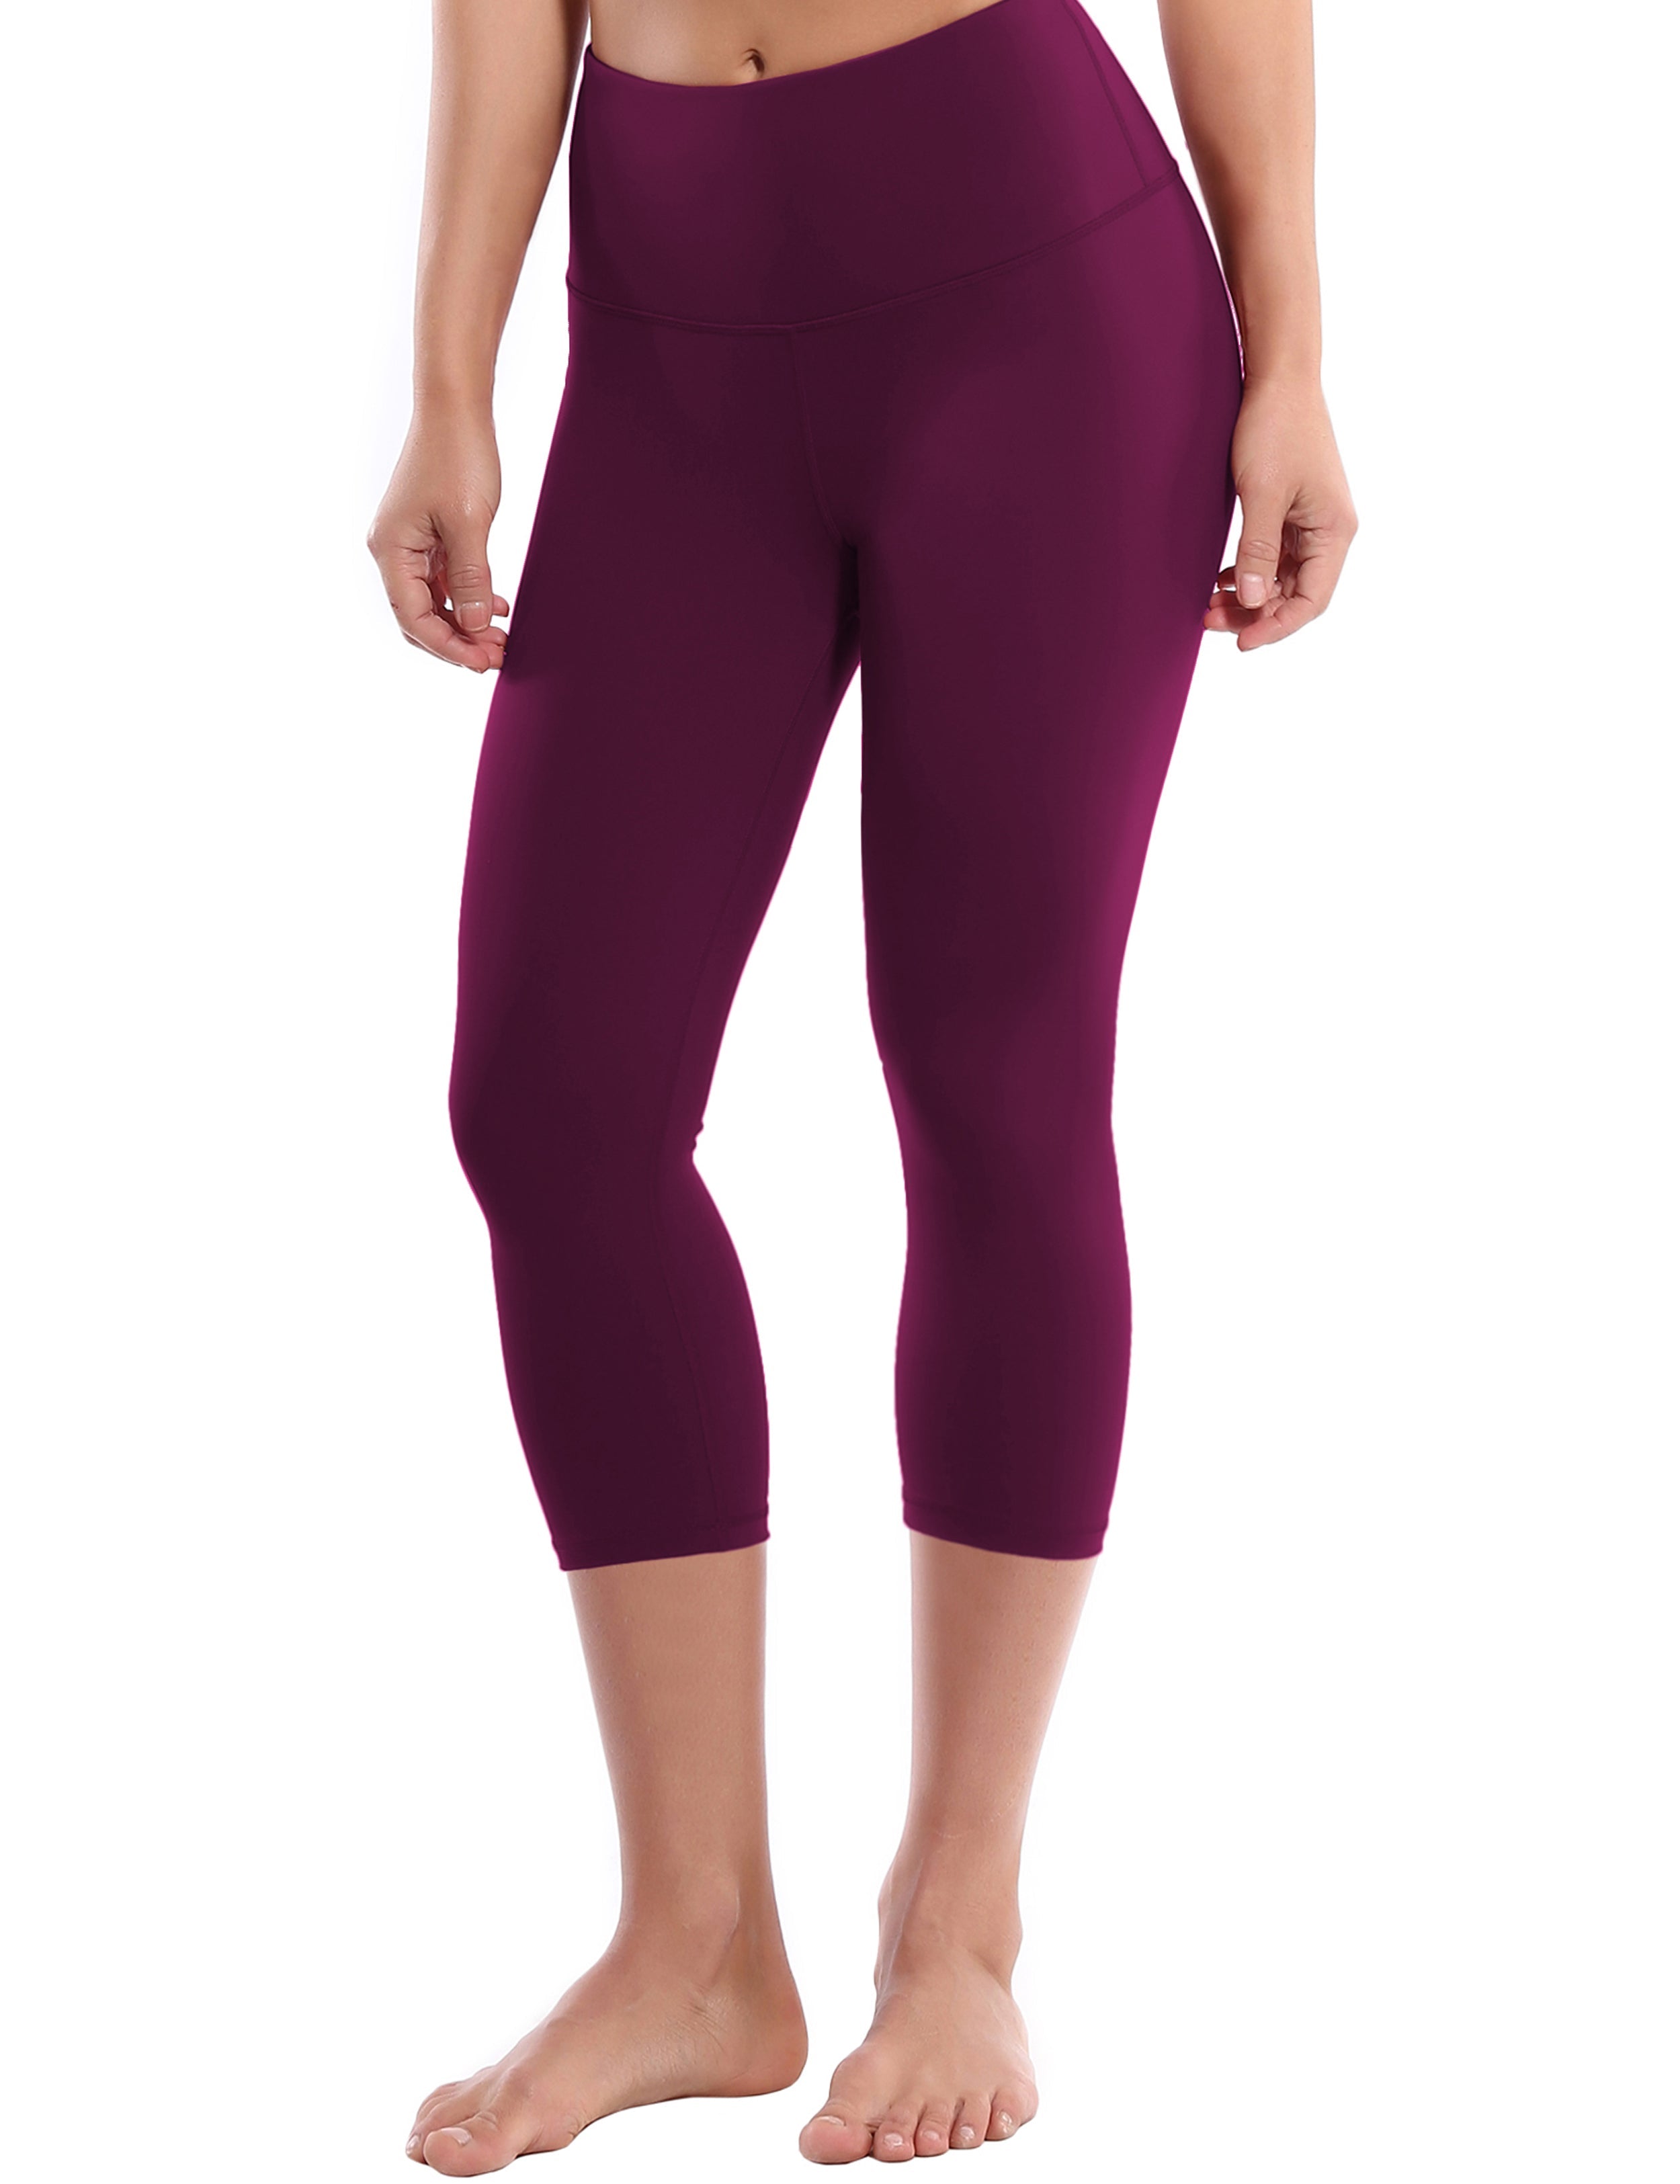 19" High Waist Crop Tight Capris grapevine 75%Nylon/25%Spandex Fabric doesn't attract lint easily 4-way stretch No see-through Moisture-wicking Tummy control Inner pocket